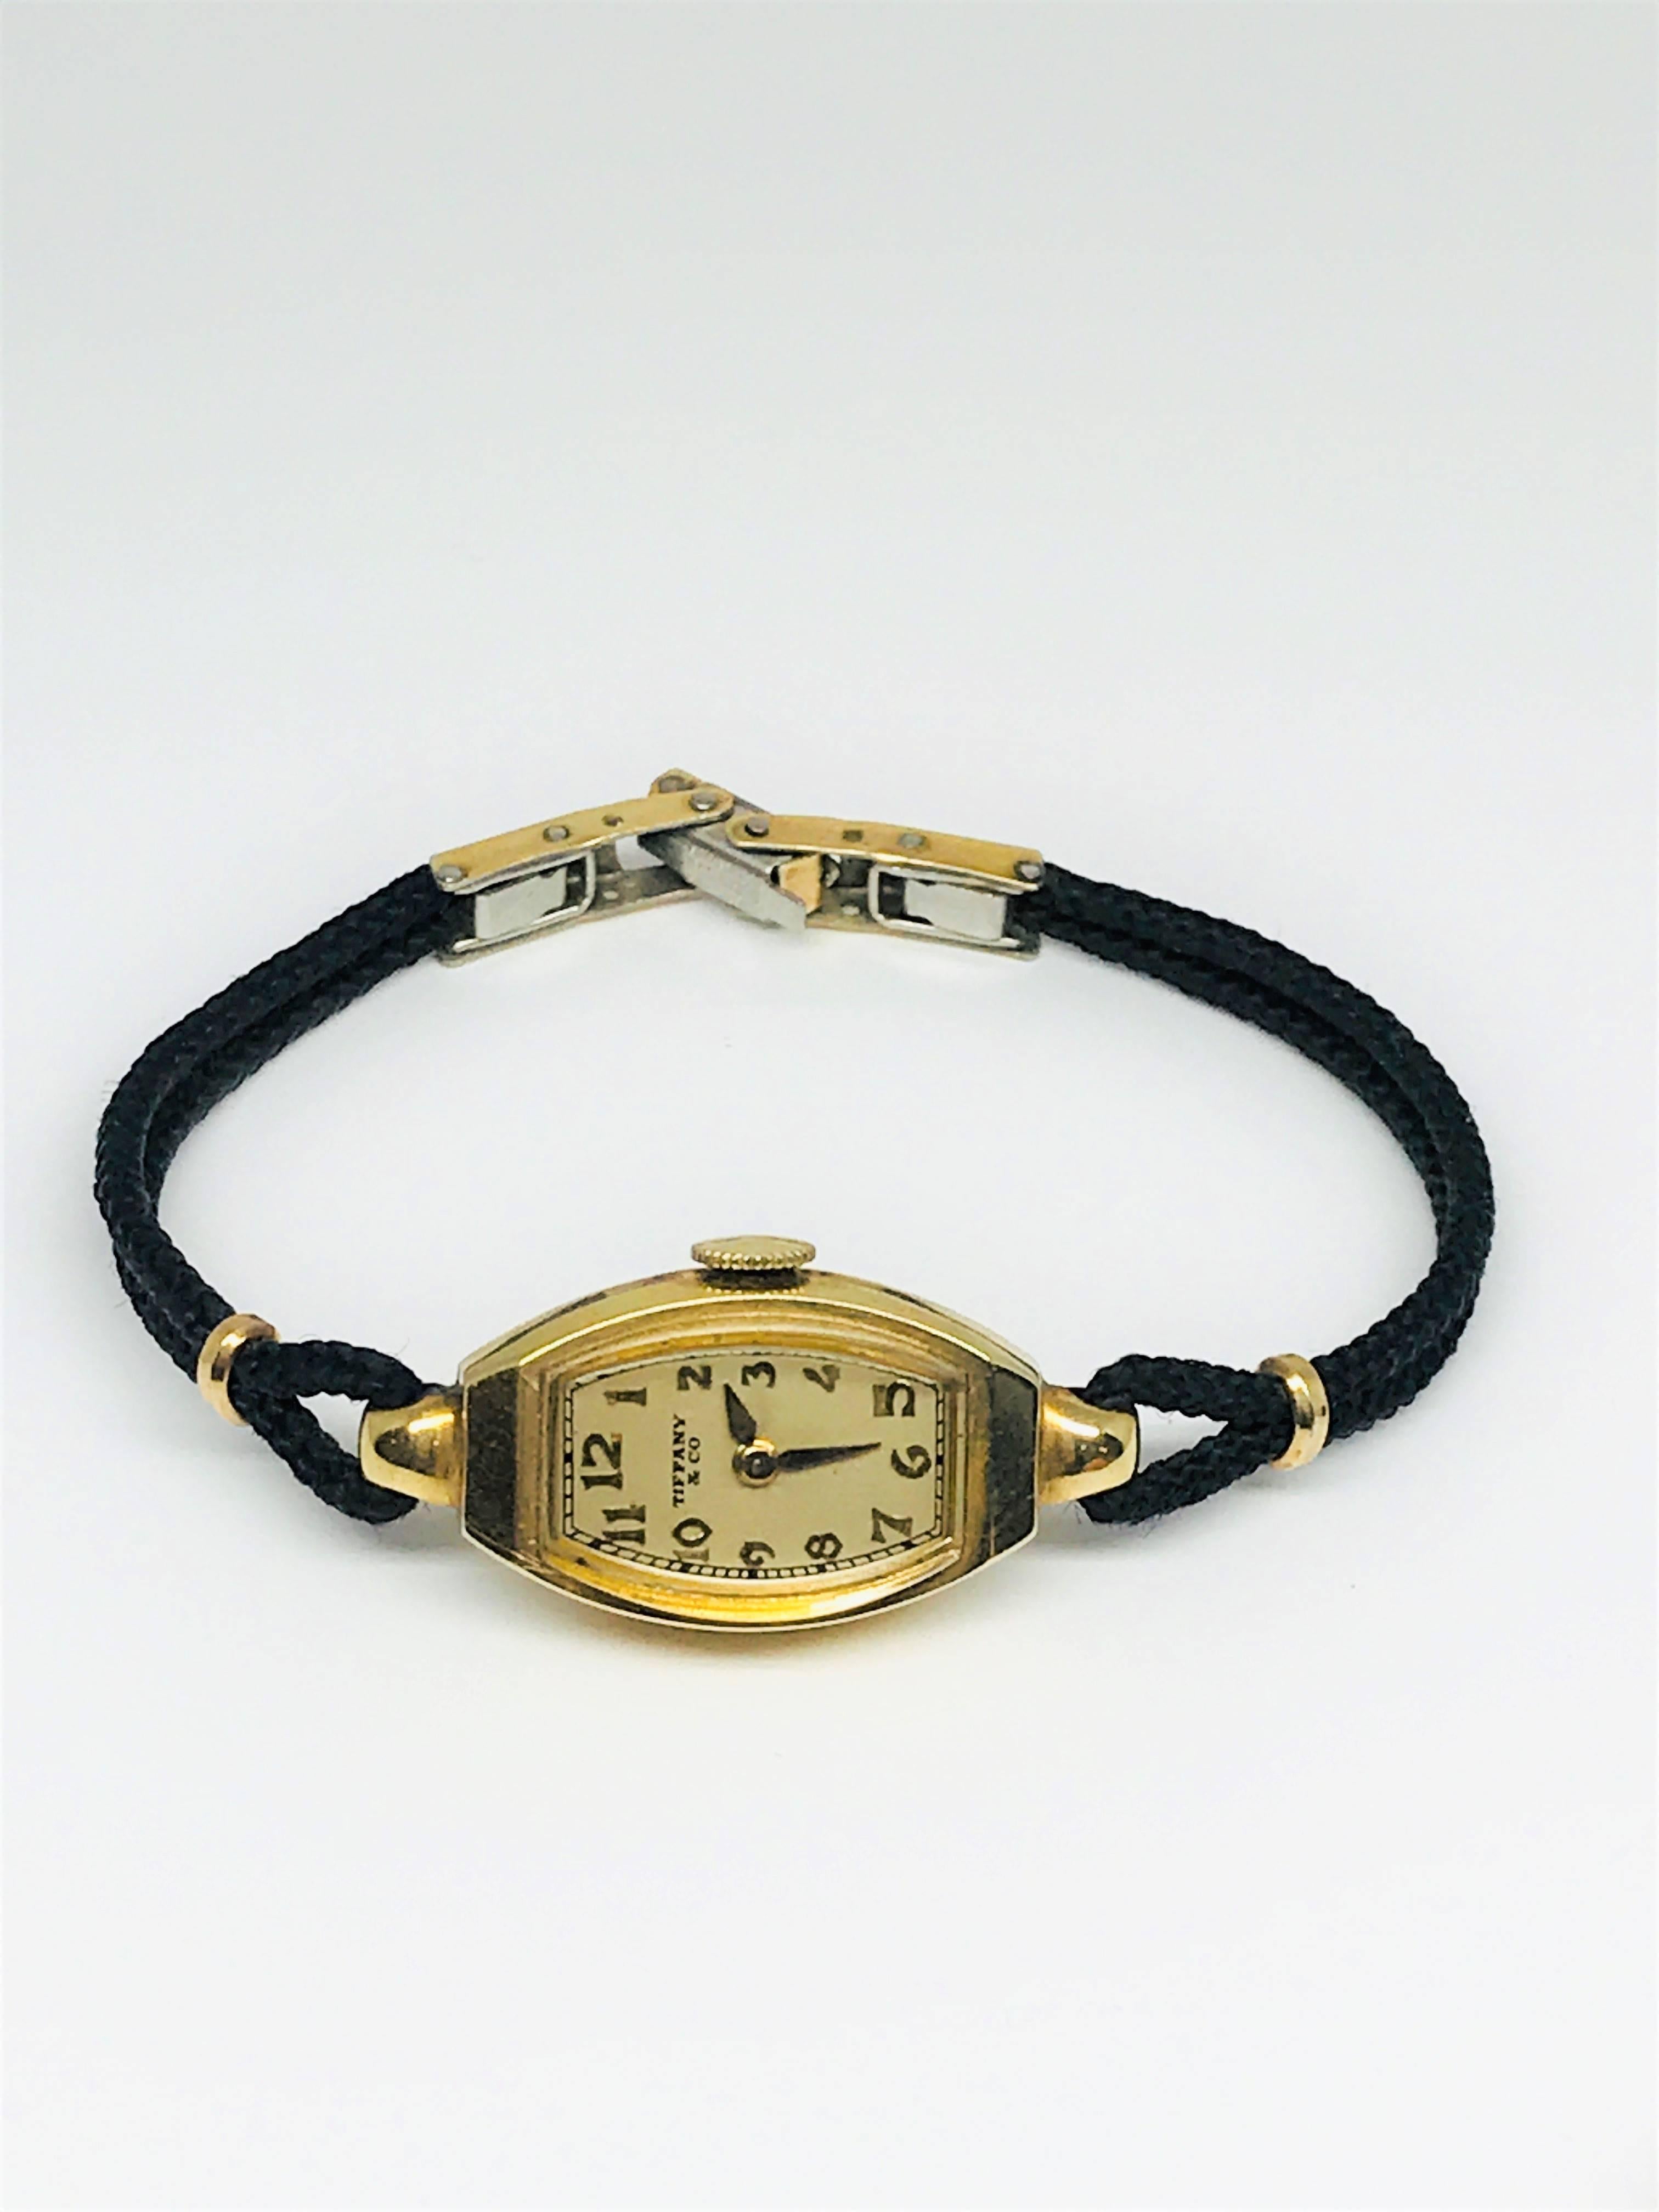 Super sweet ladies 14k gold wrist watch with black silk band. This watch was made by Hamilton for Tiffany & Co. The watch face is about and inch long and 1/2 inch wide. It is petite and so classic! Tiffany & Co never goes out of style and is the